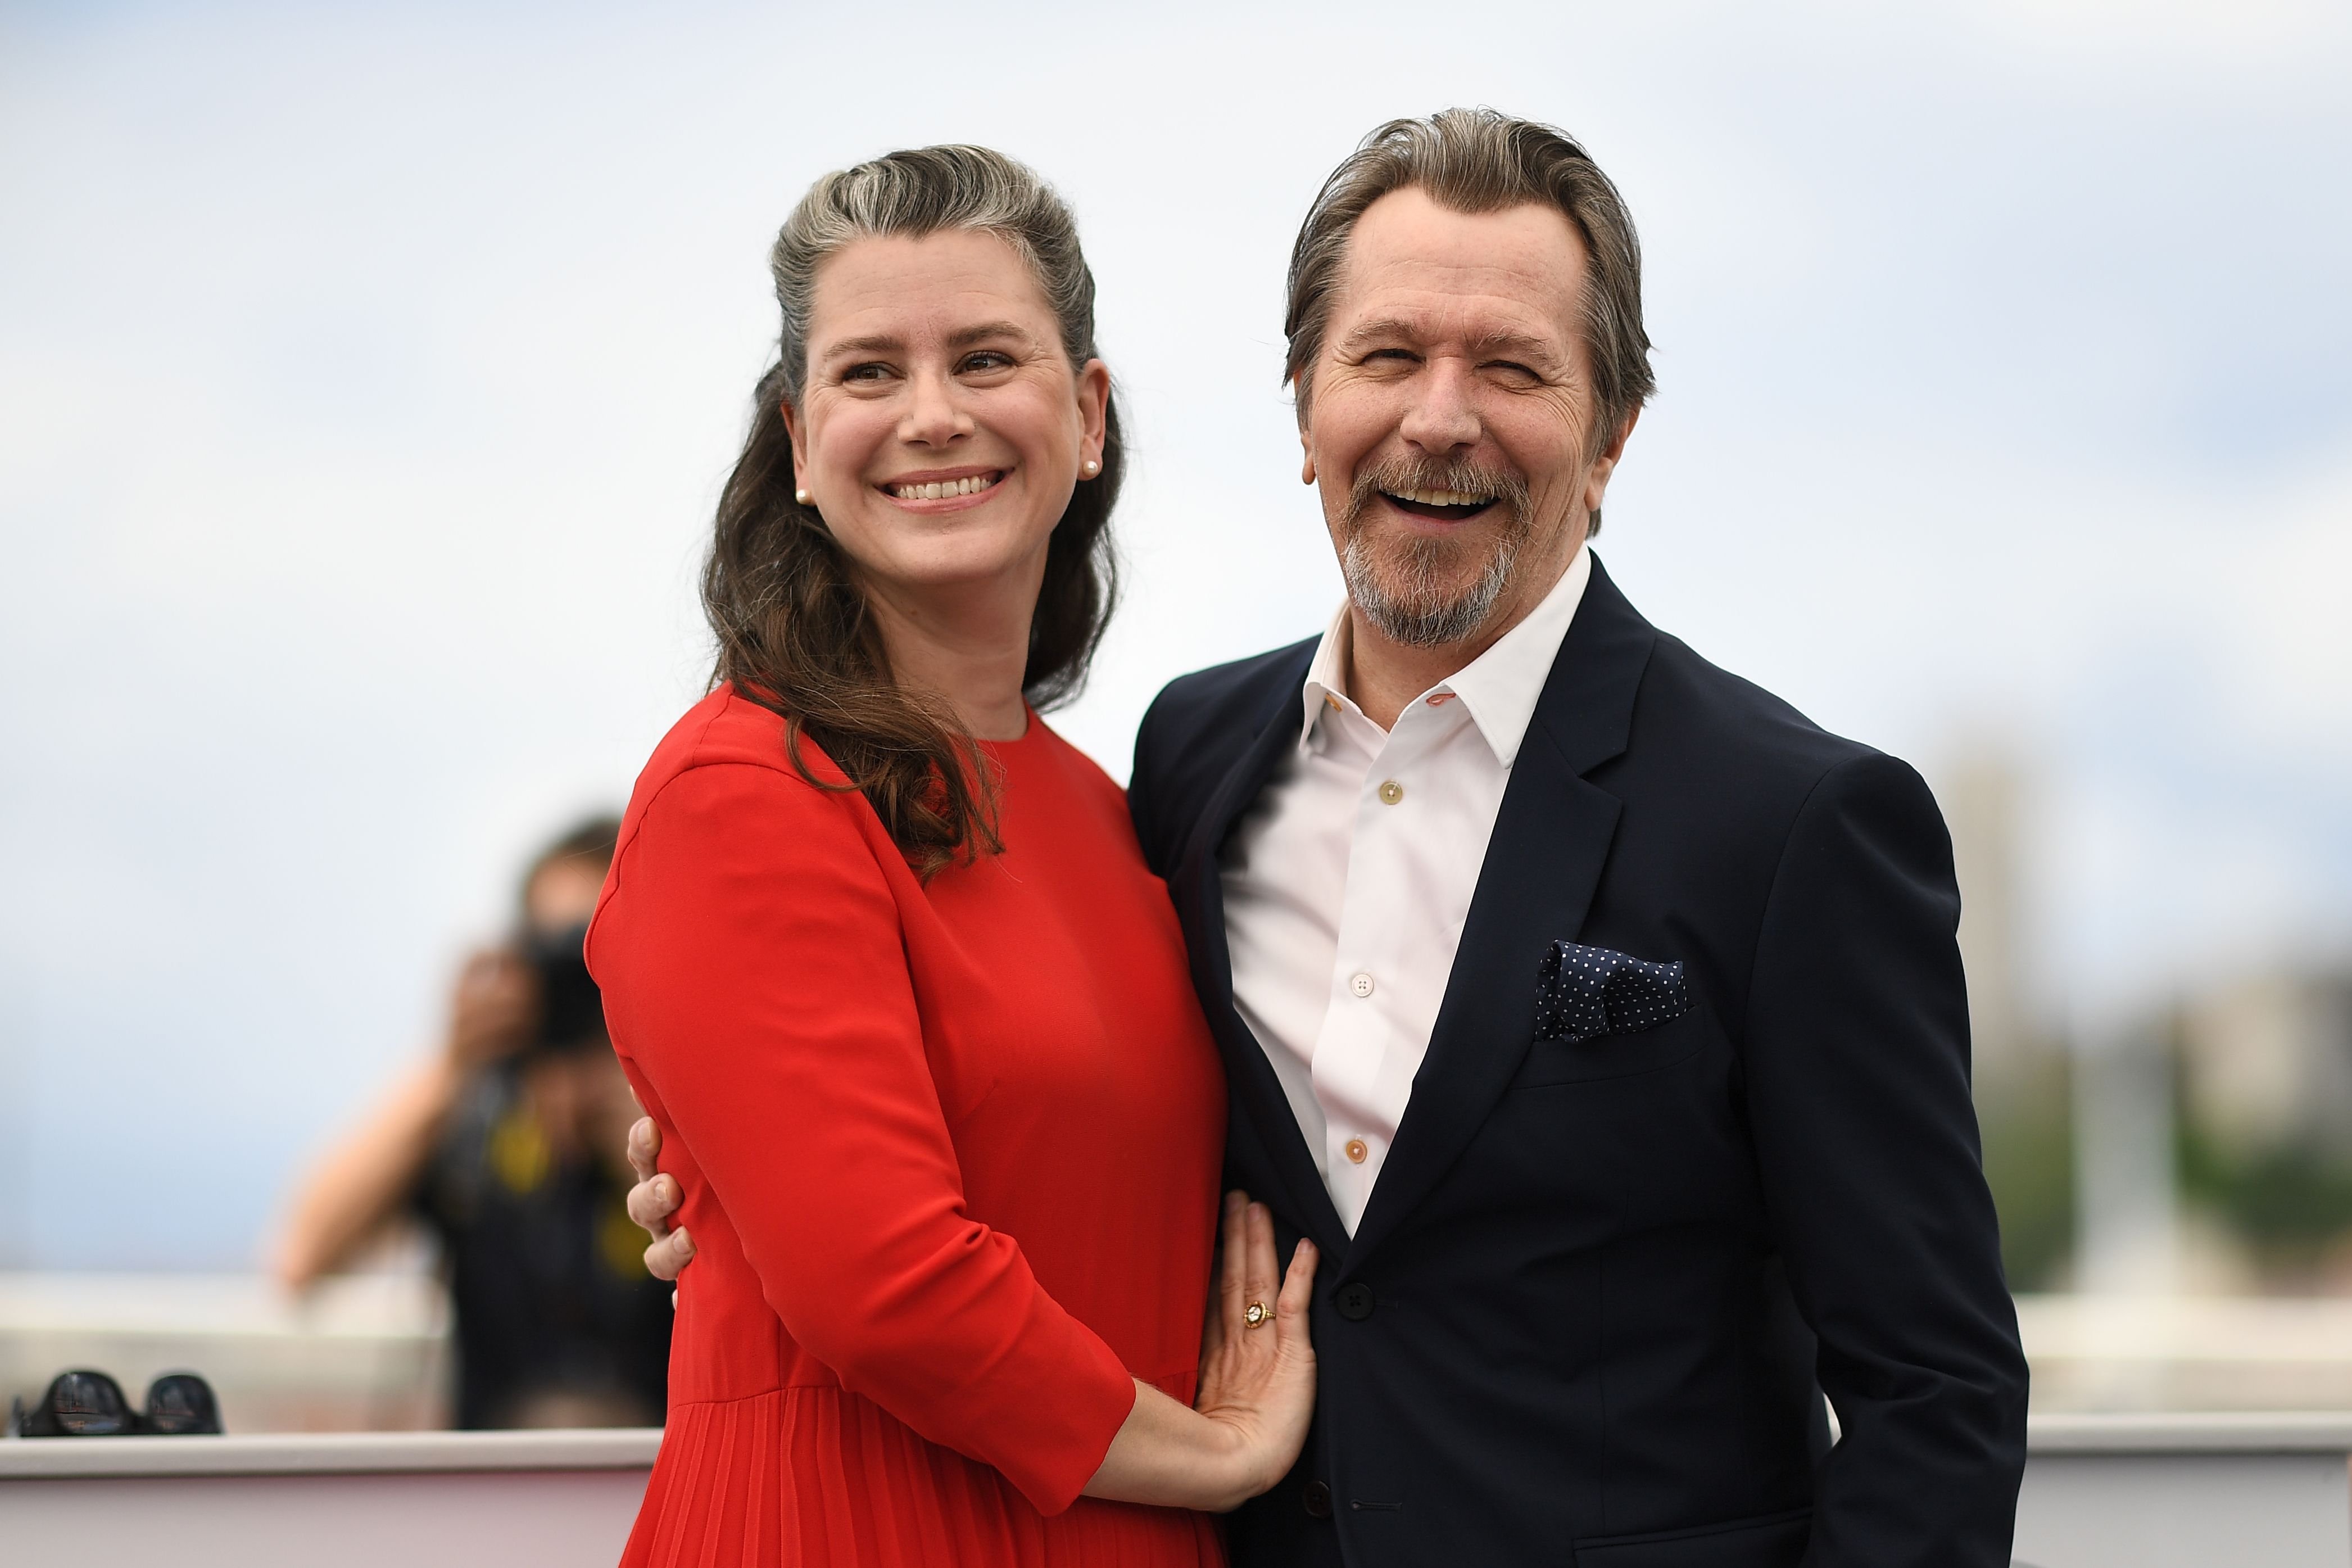 British actor Gary Oldman and his wife Gisele Schmidt during a "Rendez-Vous with Gary Oldman" at the 71st edition of the Cannes Film Festival in Cannes, southern France. | Source: Getty Images